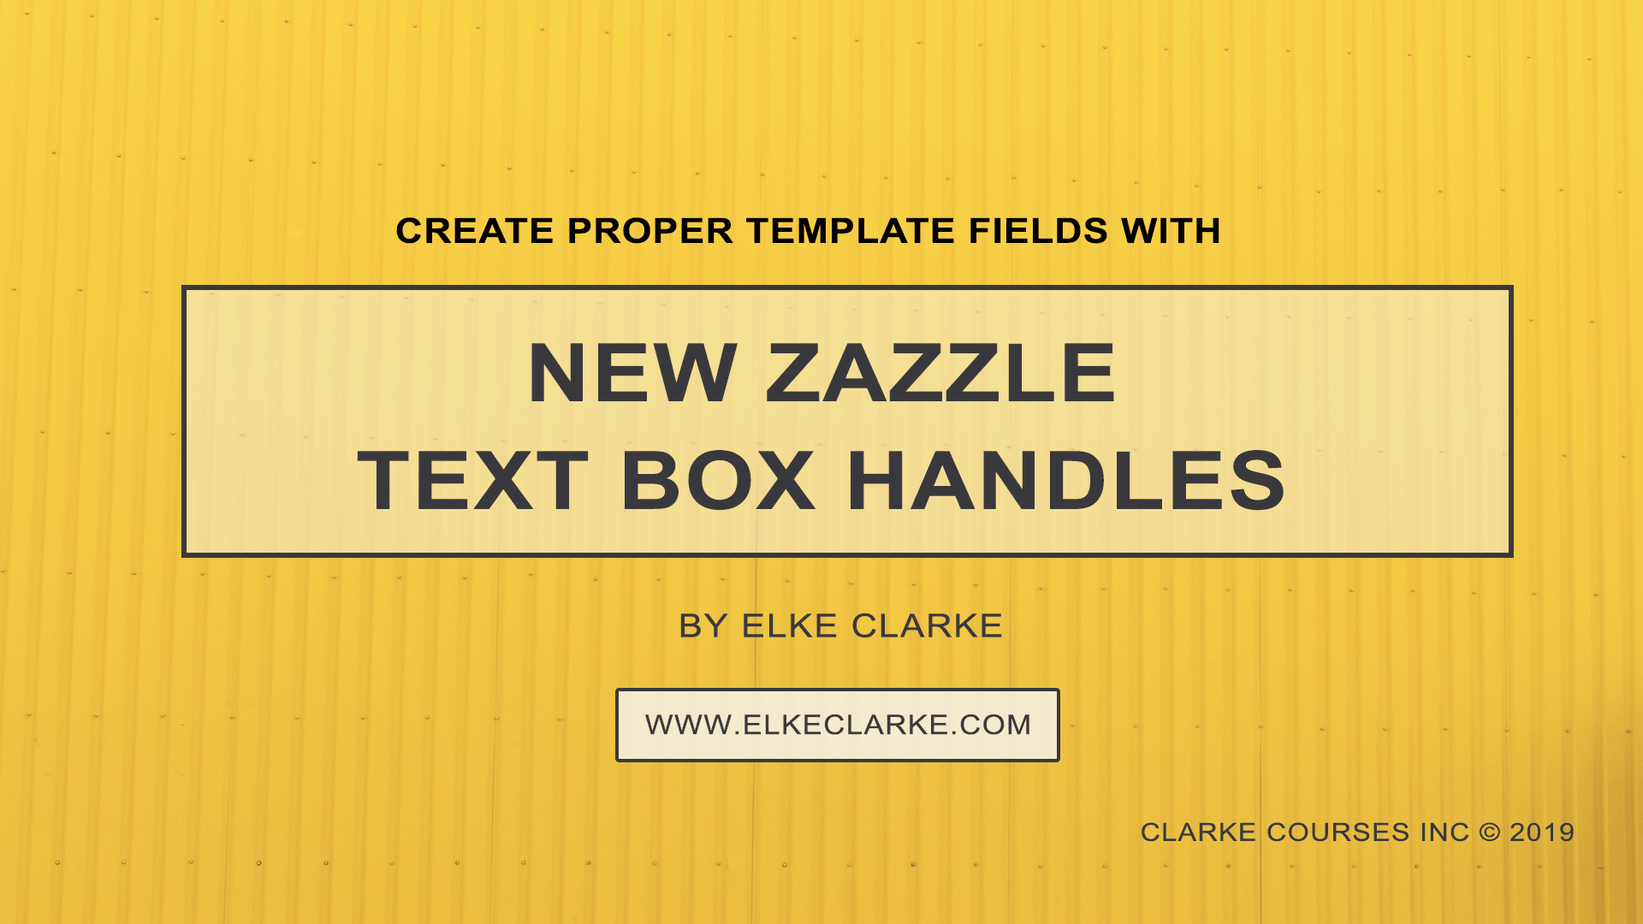 Elke Clarke | New Zazzle Text Box Handles Create Product Templates that Sell